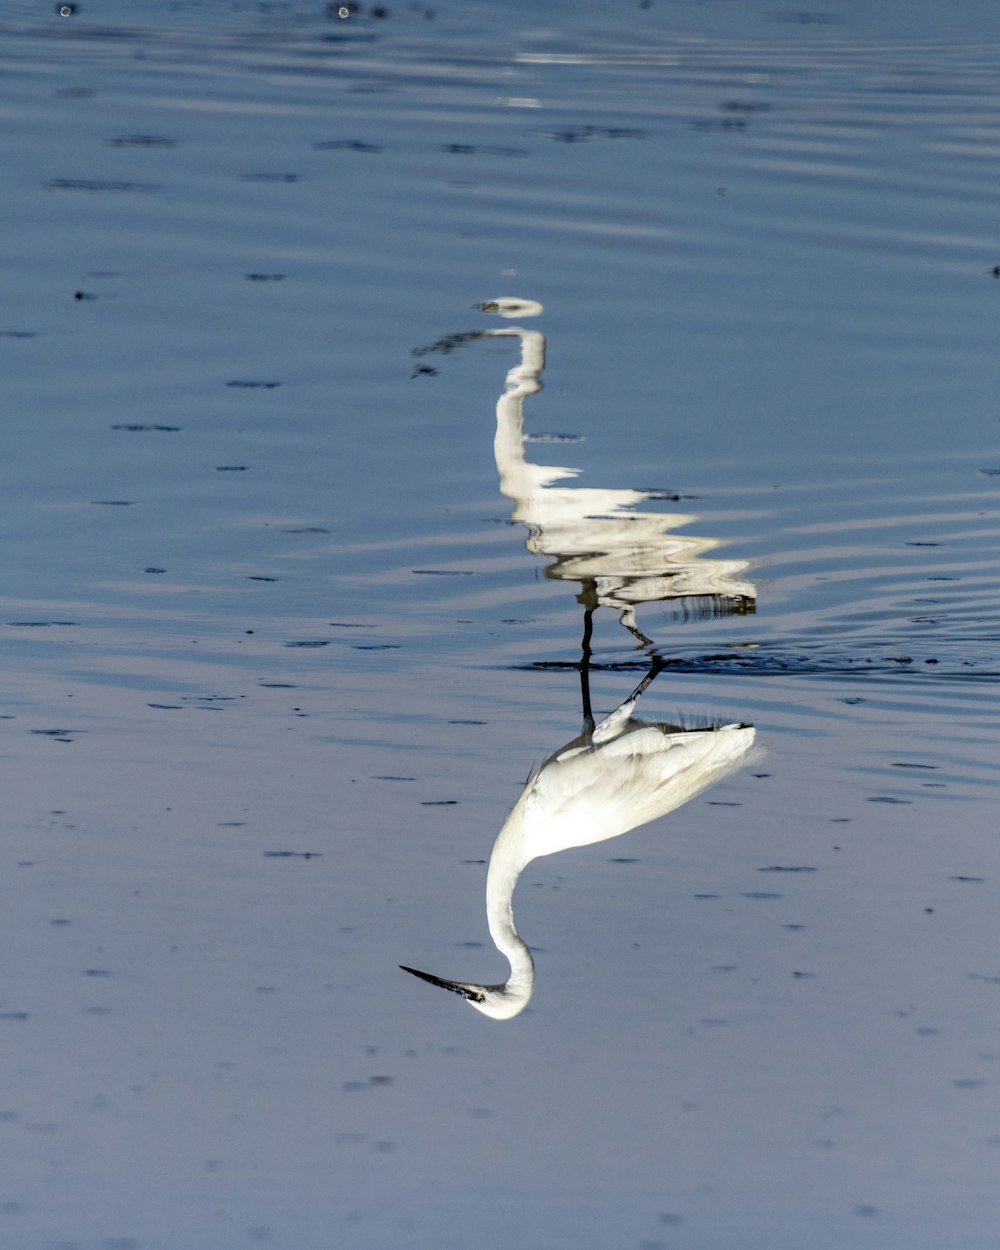 a bird on a stick in the water